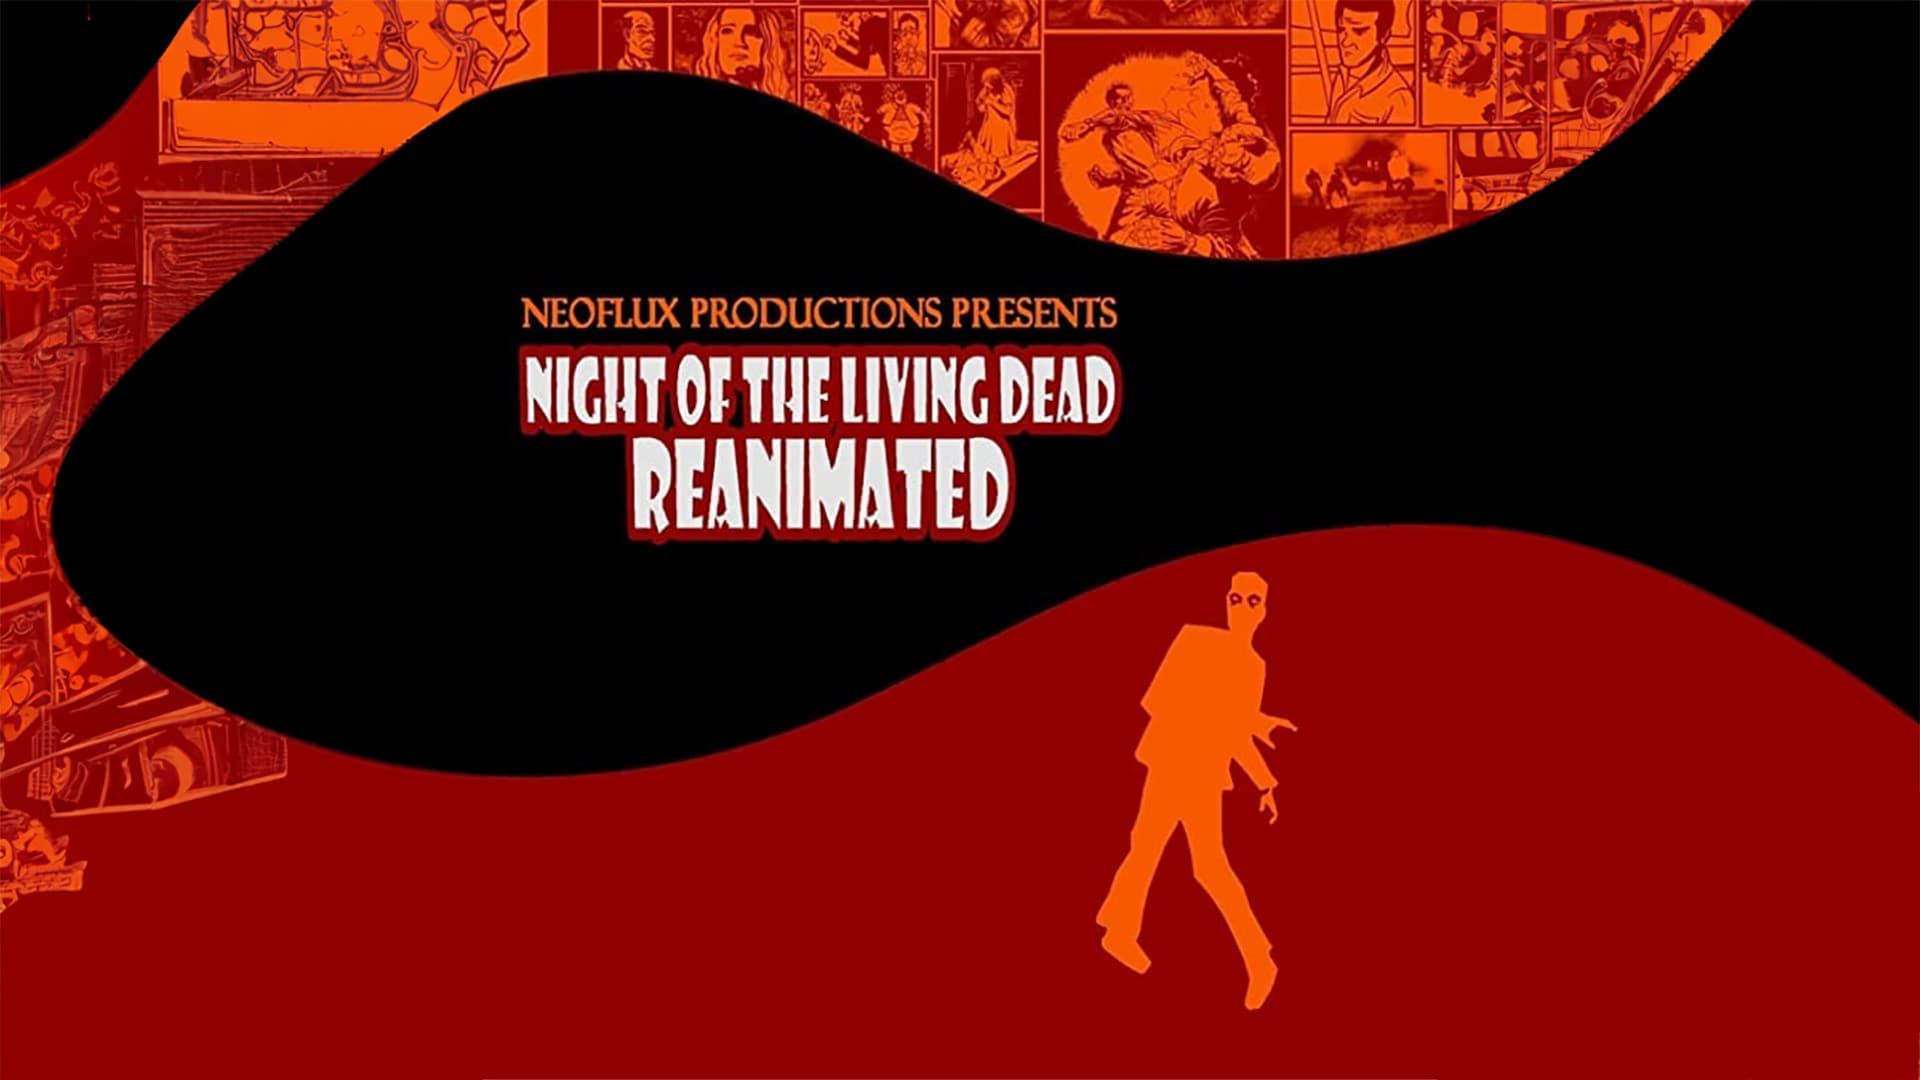 Night of the Living Dead: Reanimated (2009)